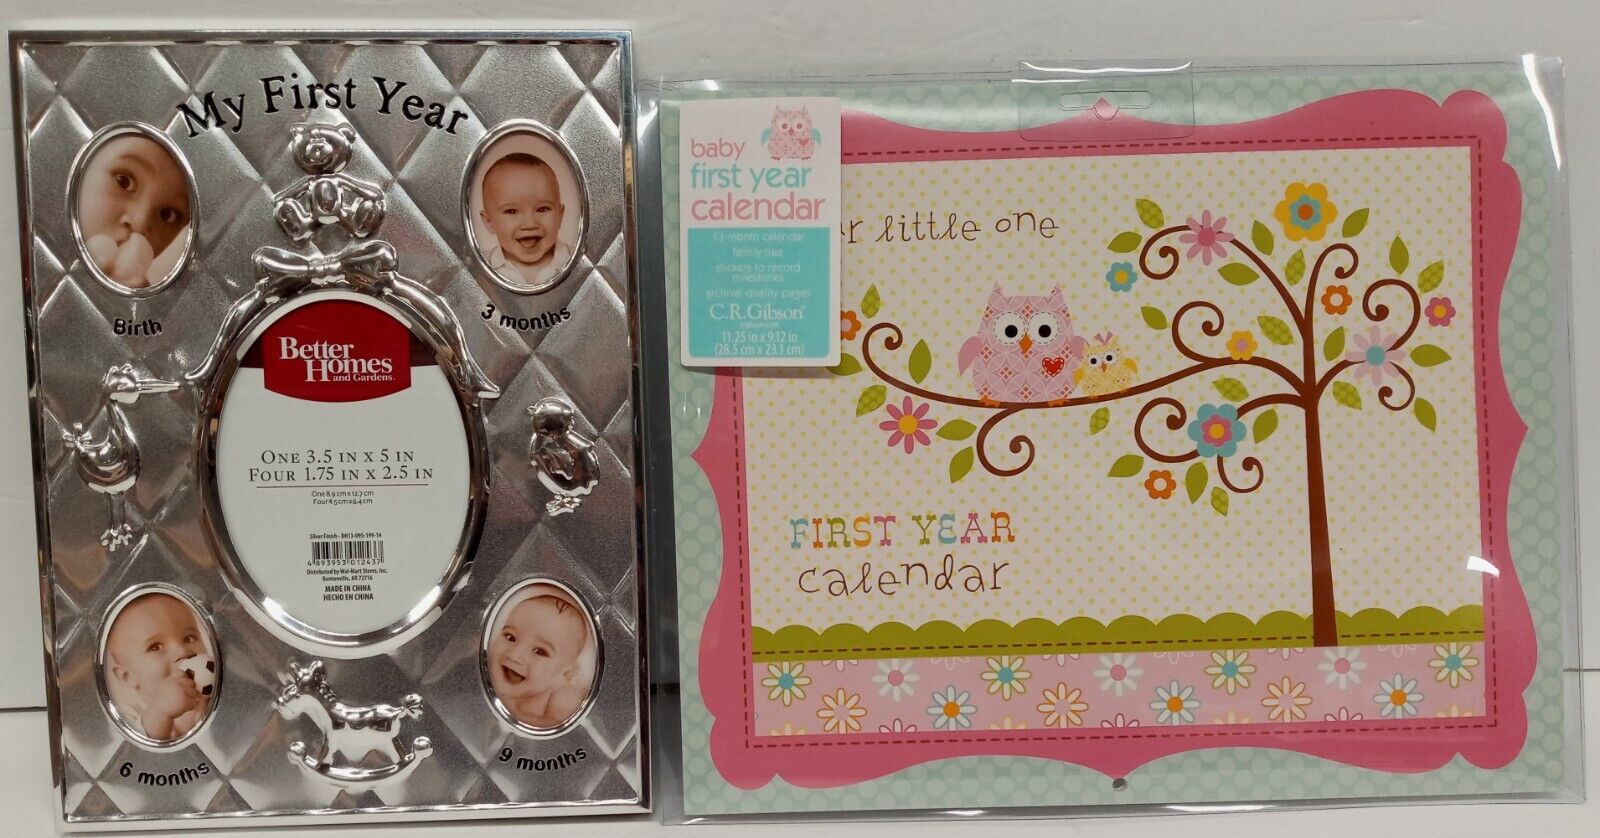 My First Year Silver Finish Picture Frame & Baby First Year Calendar Better Homes & Gardens N/A